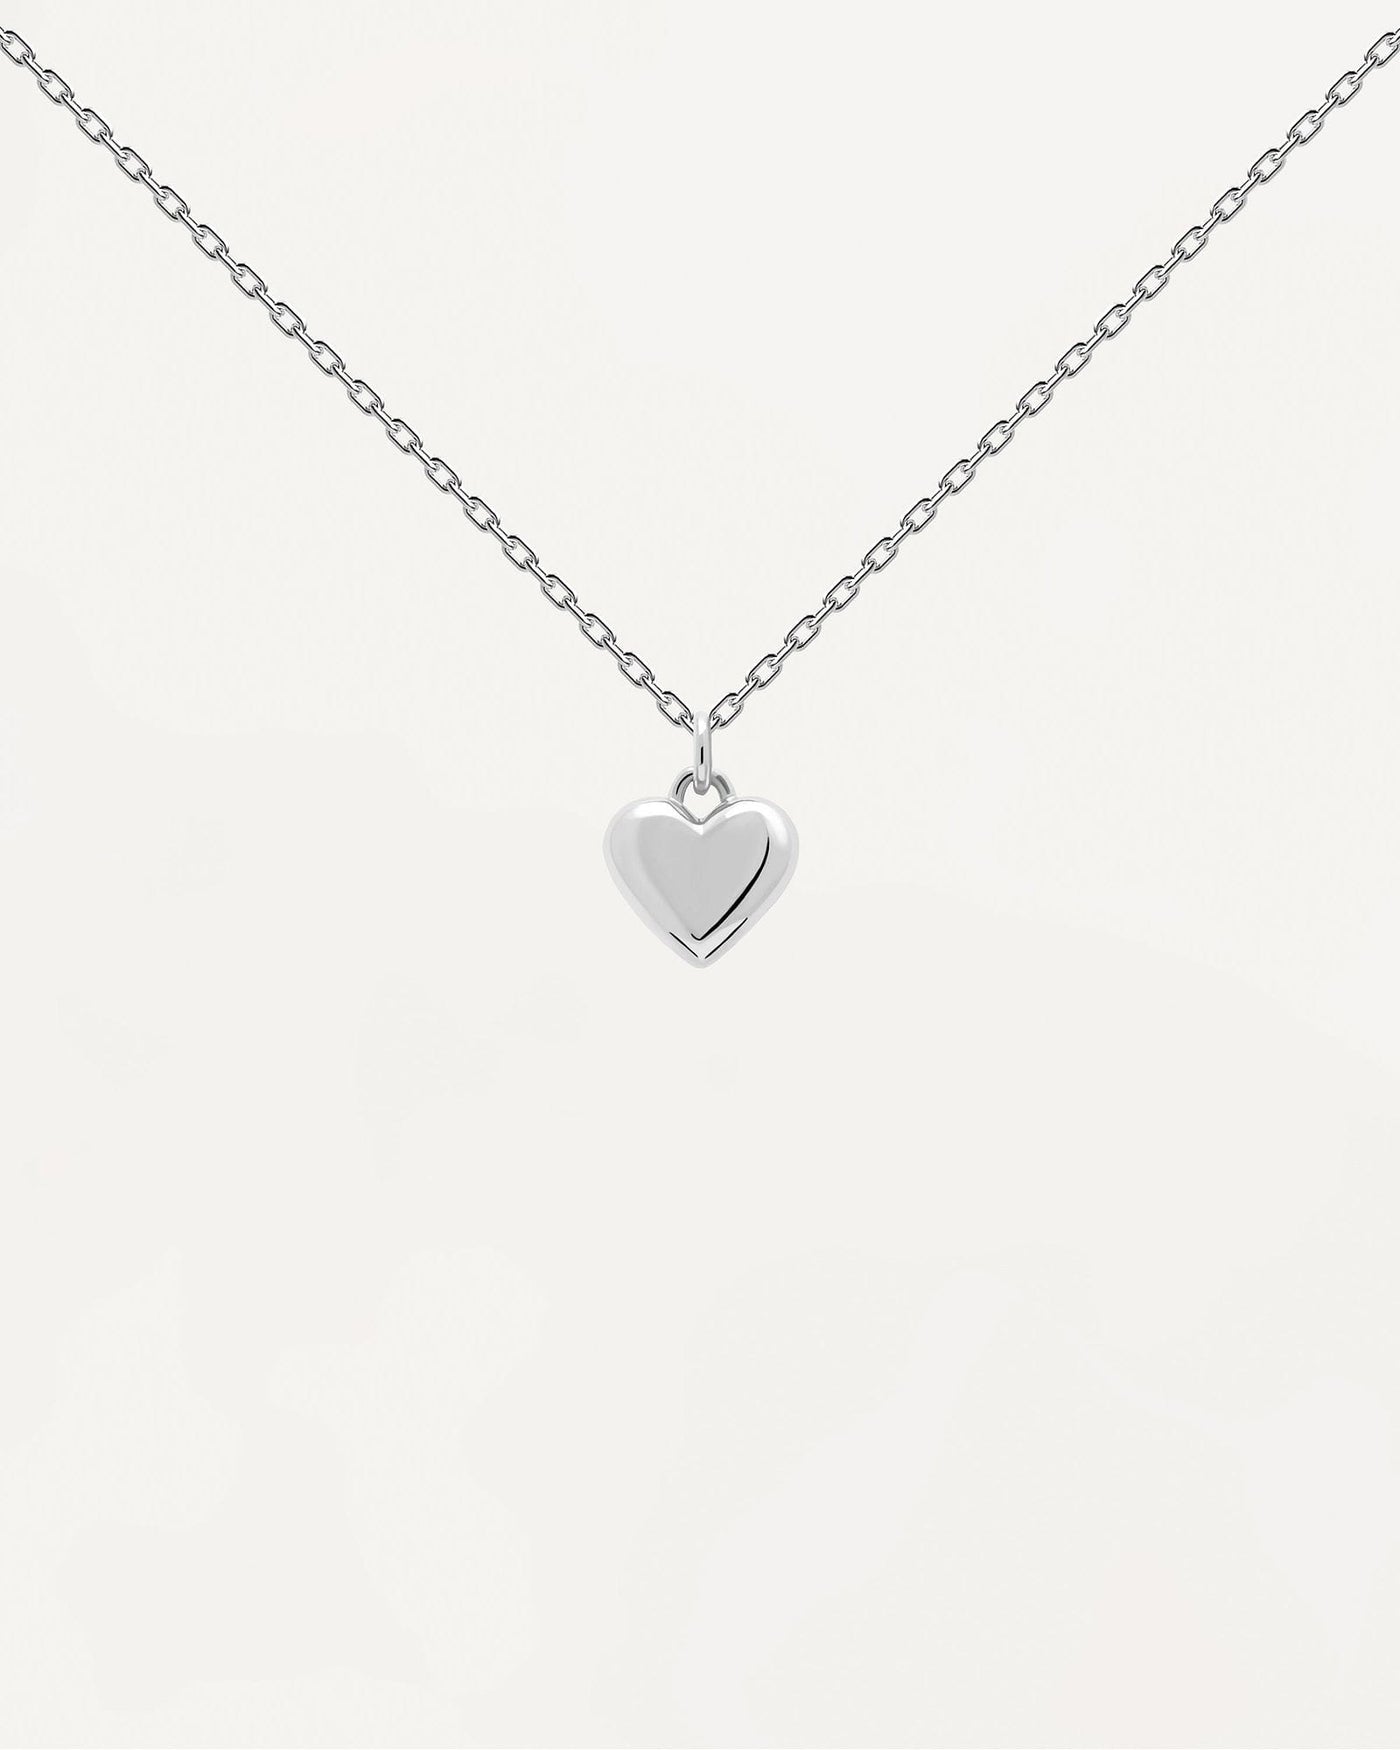 2024 Selection | L'Absolu Silver Necklace. 925 silver necklace with engravable heart pendant to customize. Get the latest arrival from PDPAOLA. Place your order safely and get this Best Seller. Free Shipping.